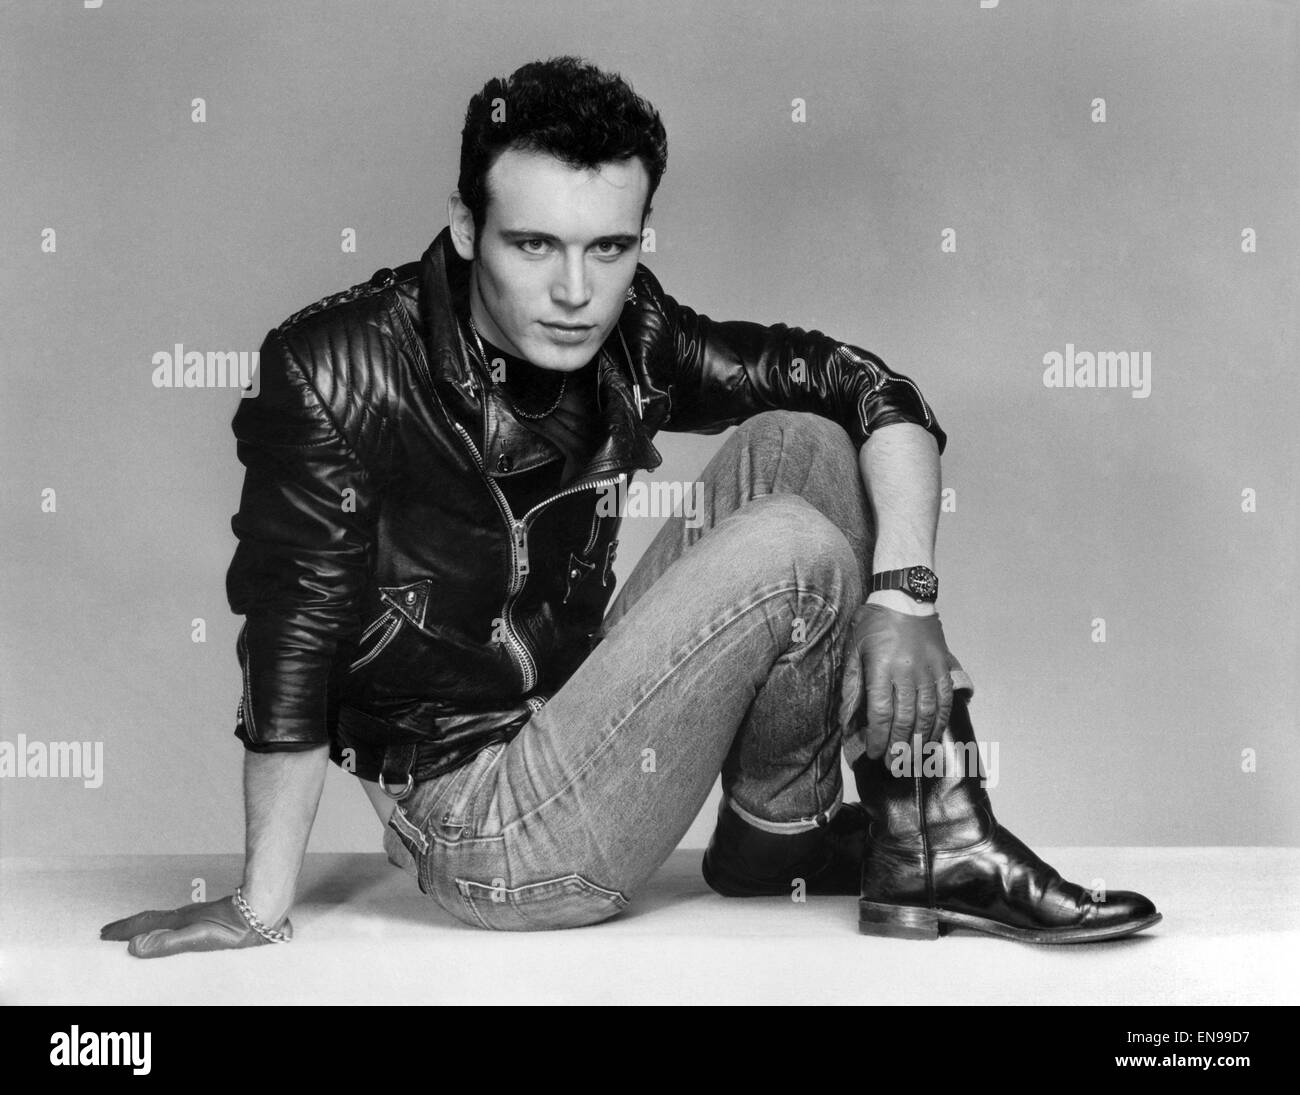 Adam and the Ants. November 1984. Stock Photo